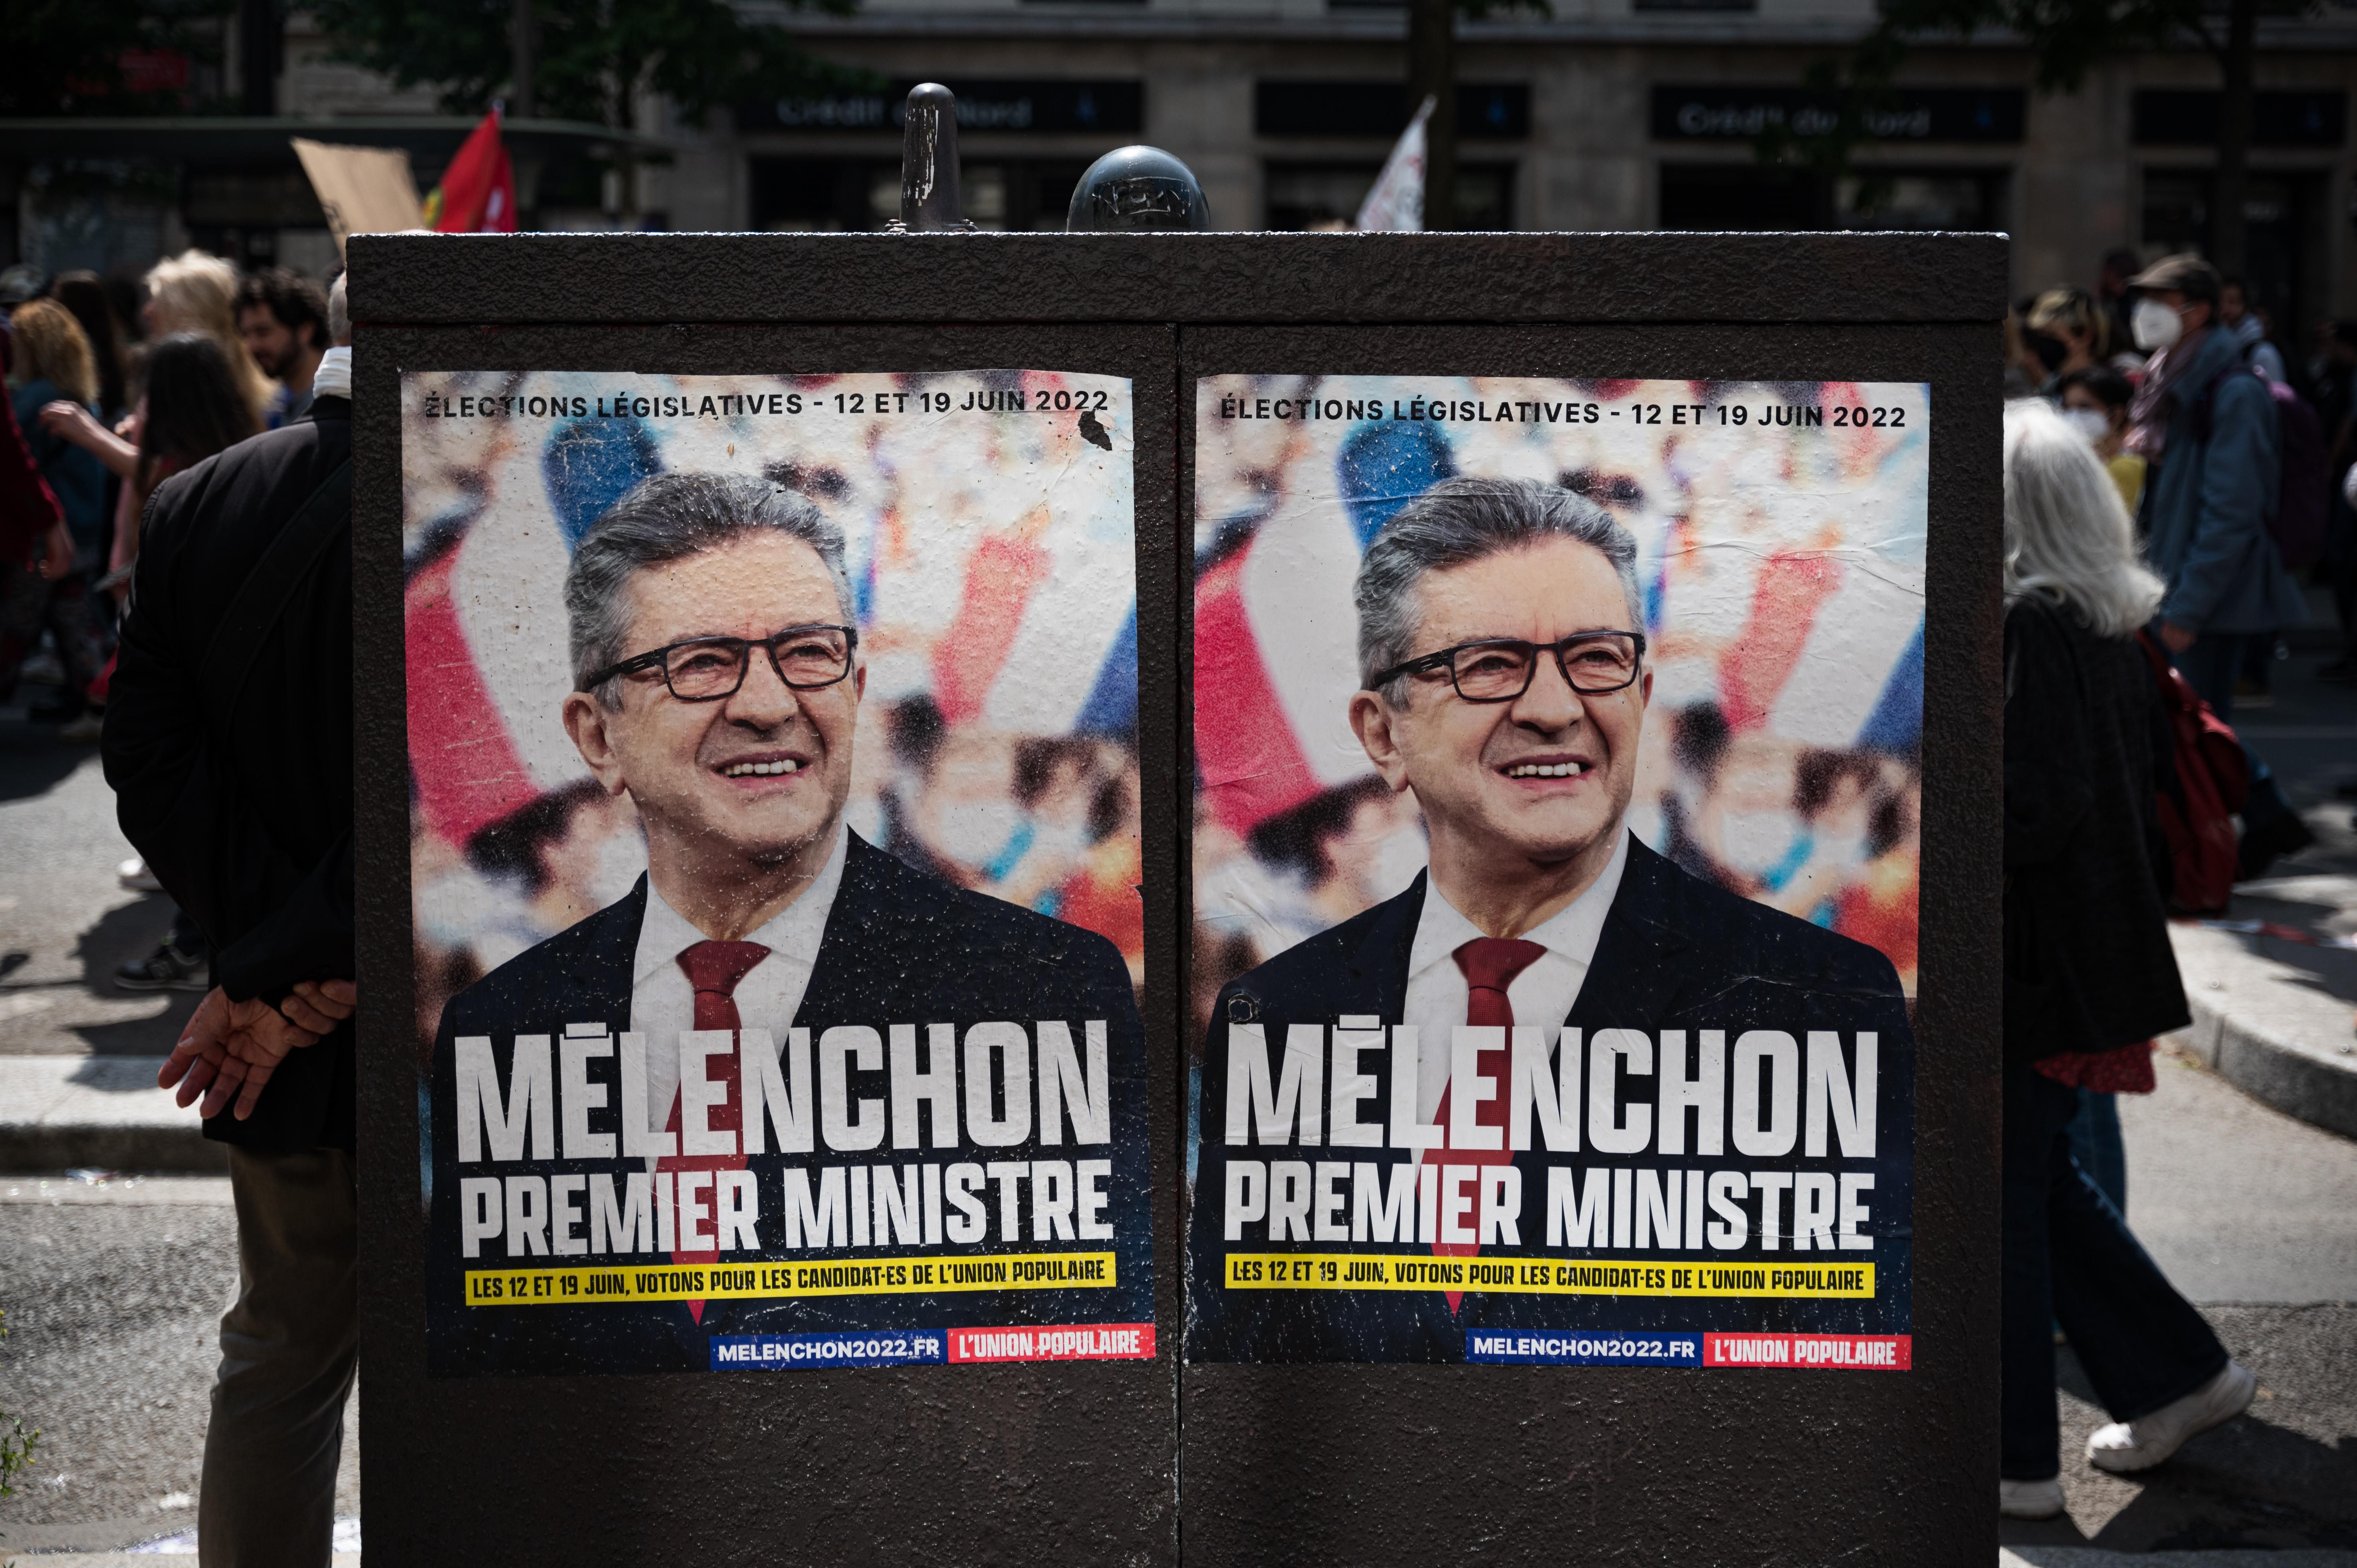 During a May Day demonstration in Paris, people walk past campaign posters for the June 2022 legislative election that portray left-wing MP Jean-Luc Mélenchon as prime minister.